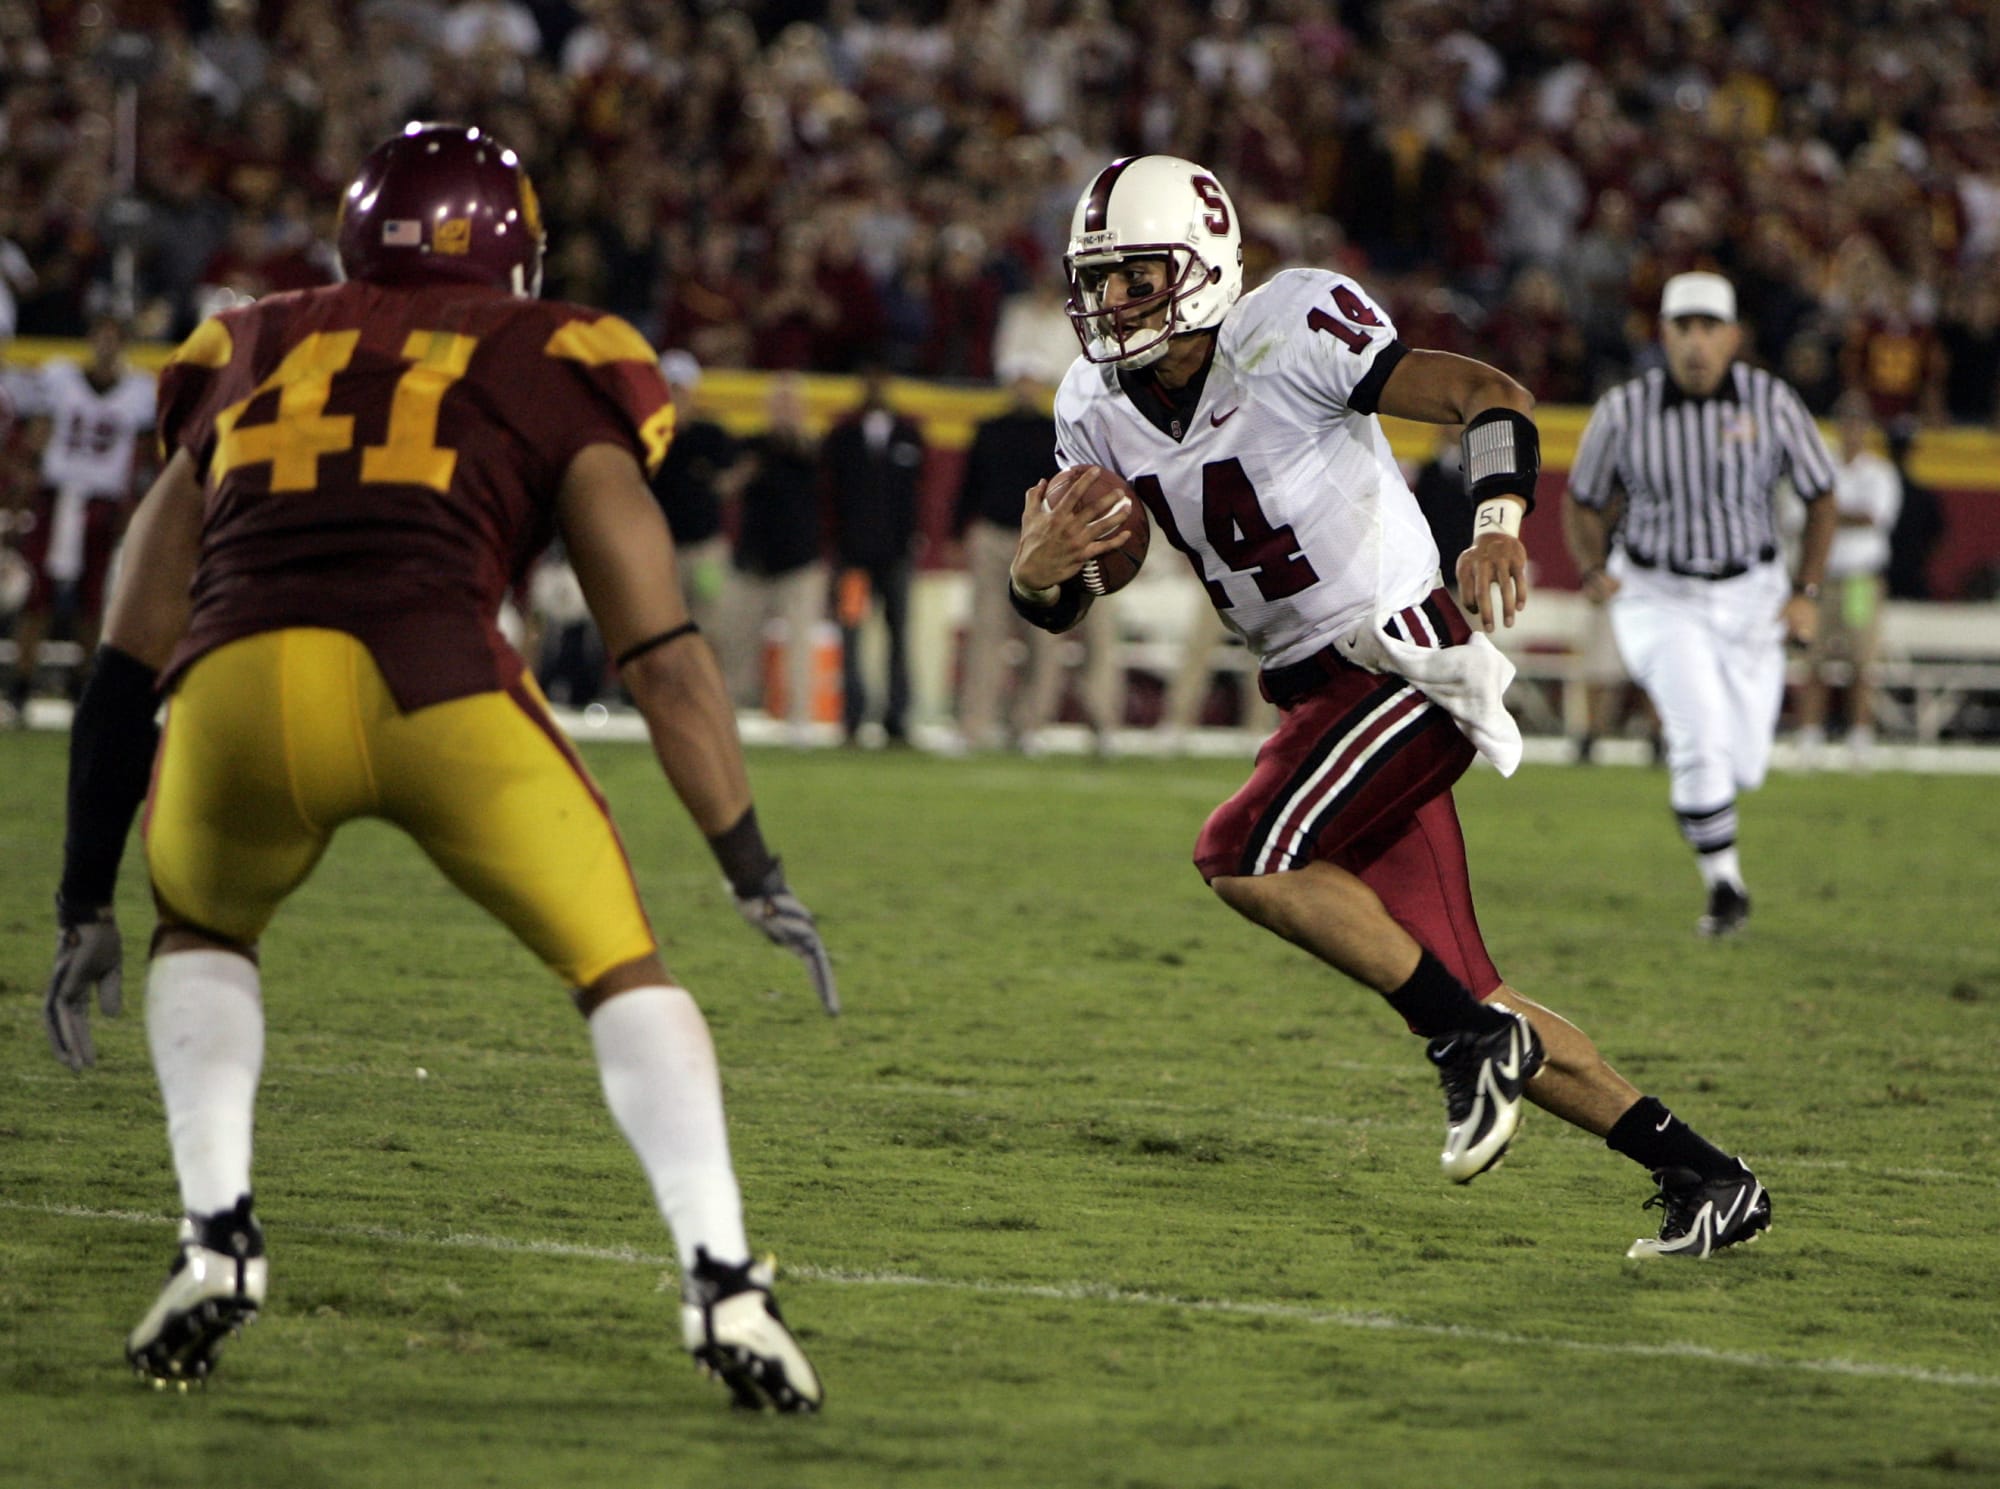 Throwback Thursday 41point underdog Stanford upsets USC in 2007